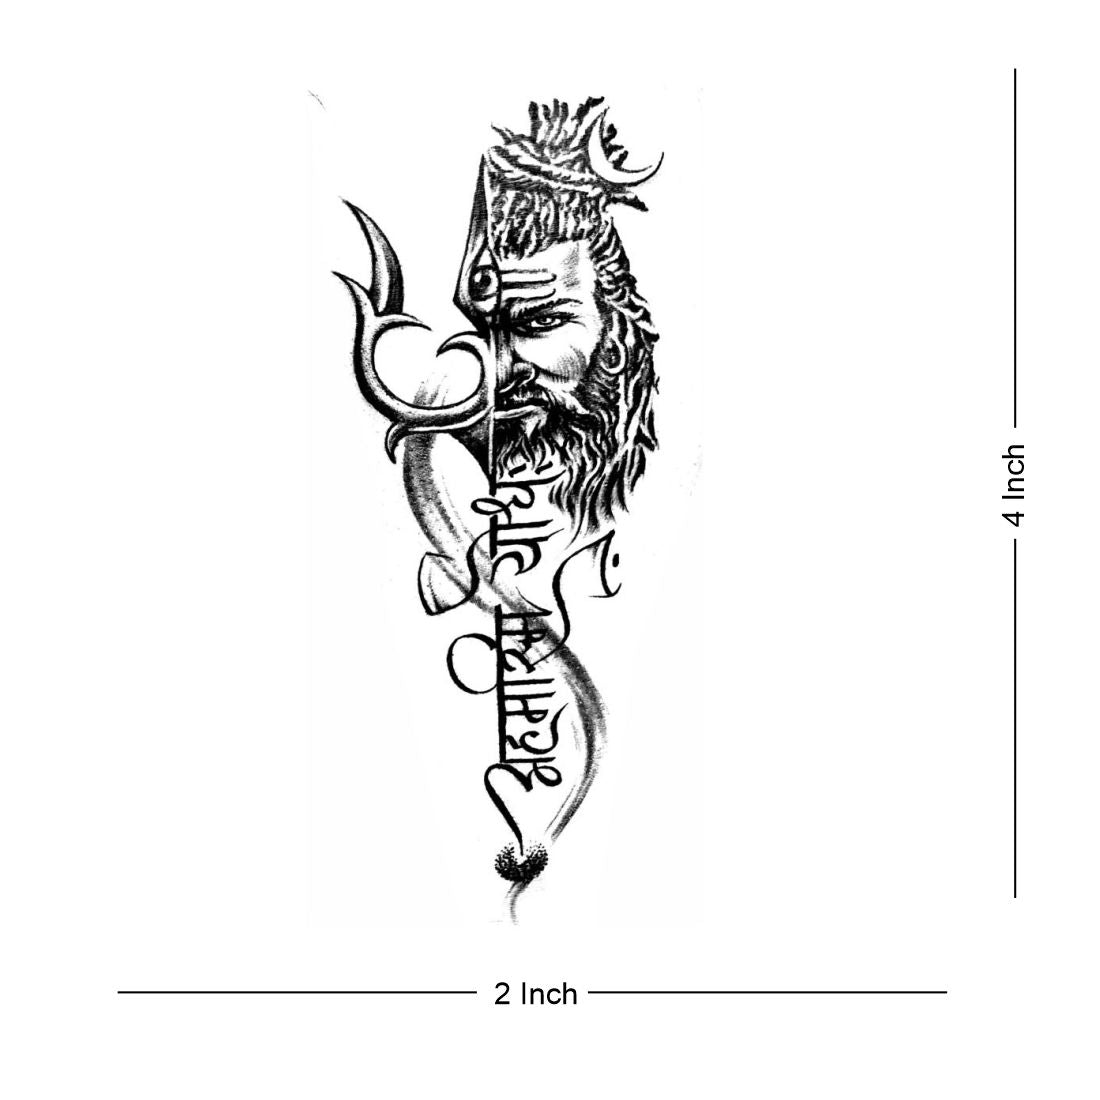 Trishul Shiva Tattoo with your partner from these Top 15 Designs